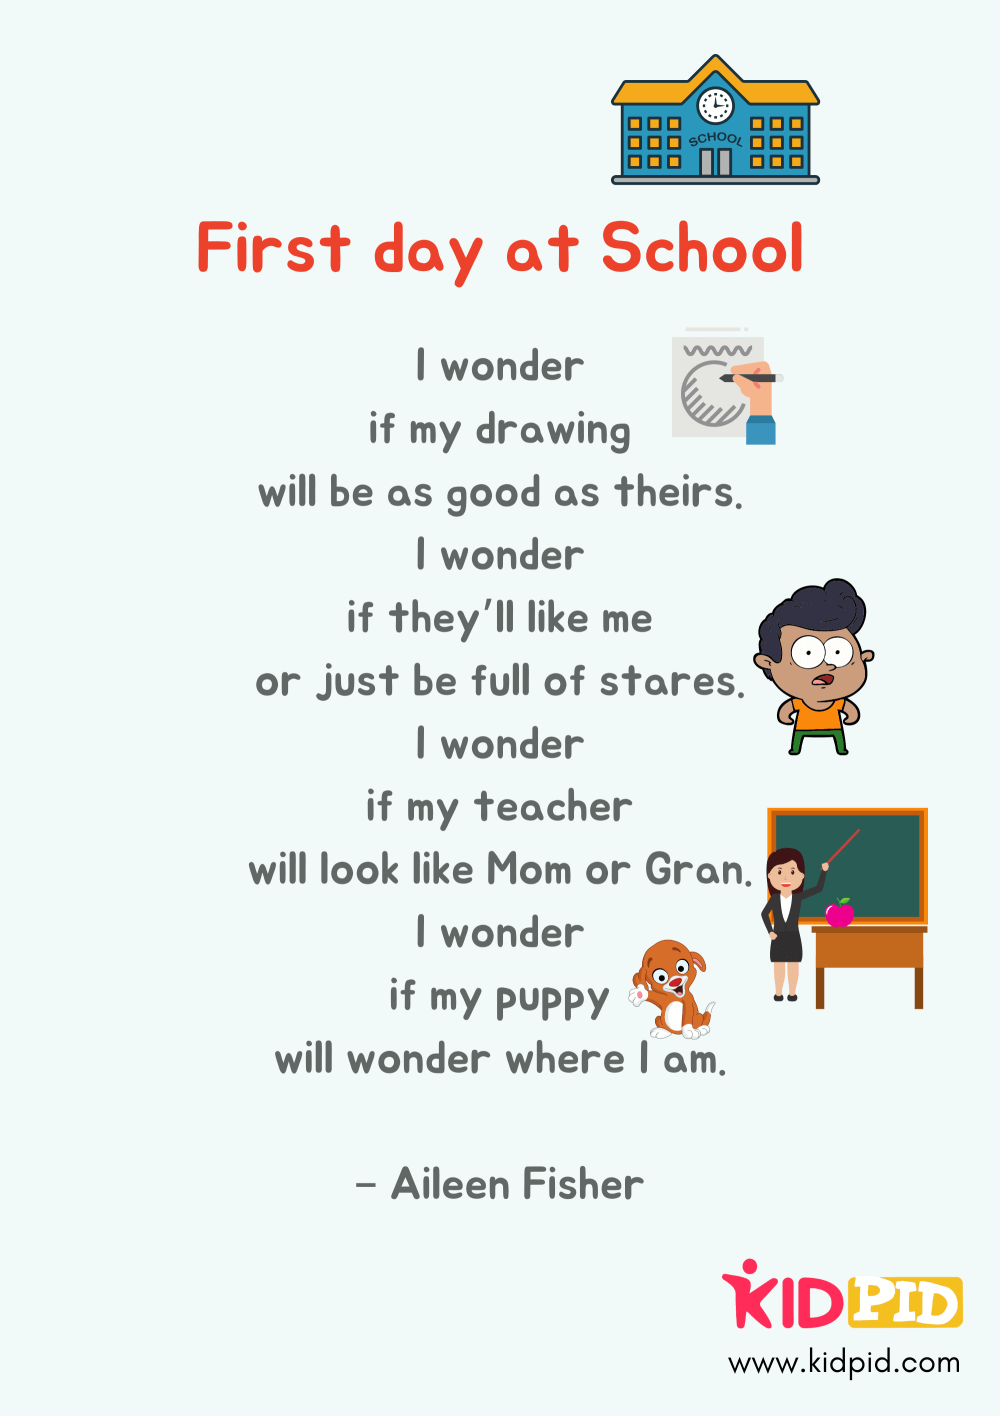 first-day-at-school-class-2-poem-kidpid